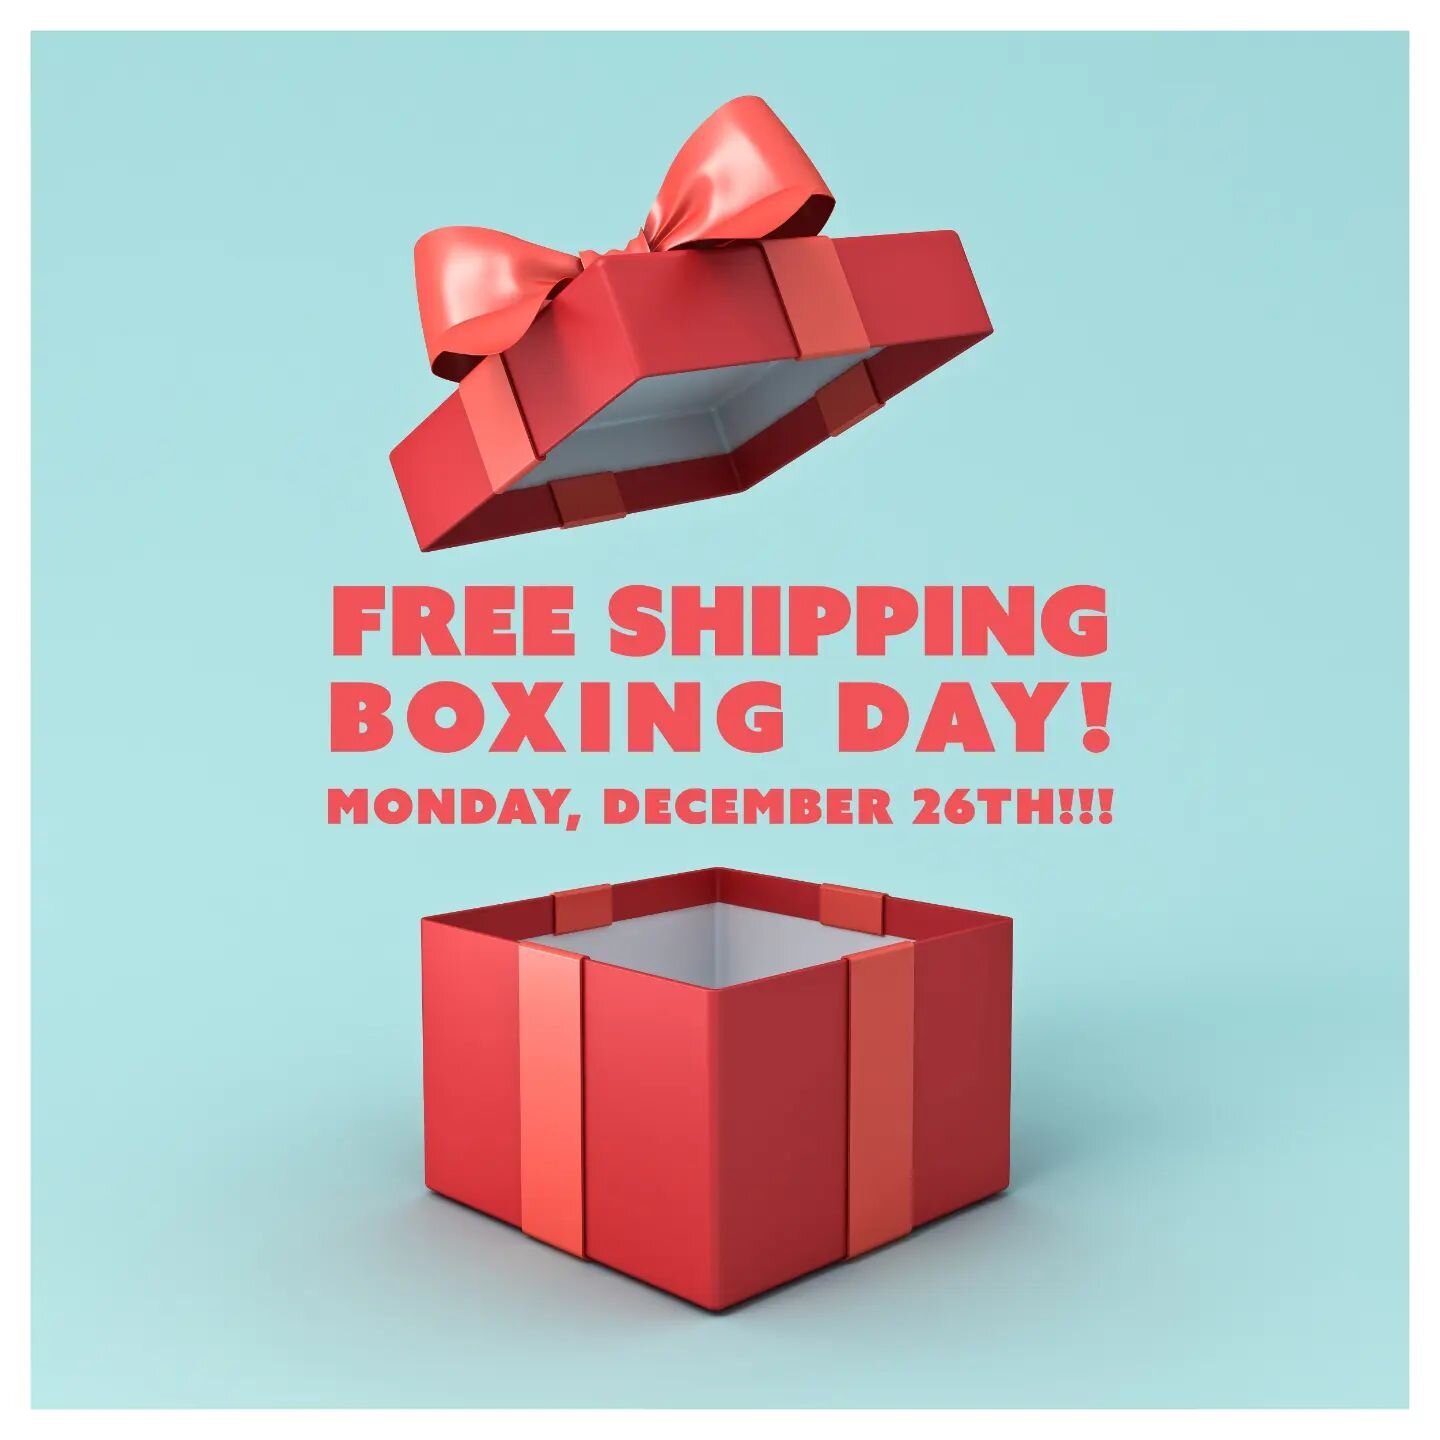 FREE SHIPPING on all our Merch items on Boxing Day 🥊 - Monday, December 26th!!!
Visit www.chirpbirdhouses.com to learn more.
.
.
.
.
.
#chirp #chirpbirdhouses #moderndesign #modernbirdhouses #birdhouse #birdhouses #birdhouseart #birding #birdwatchin